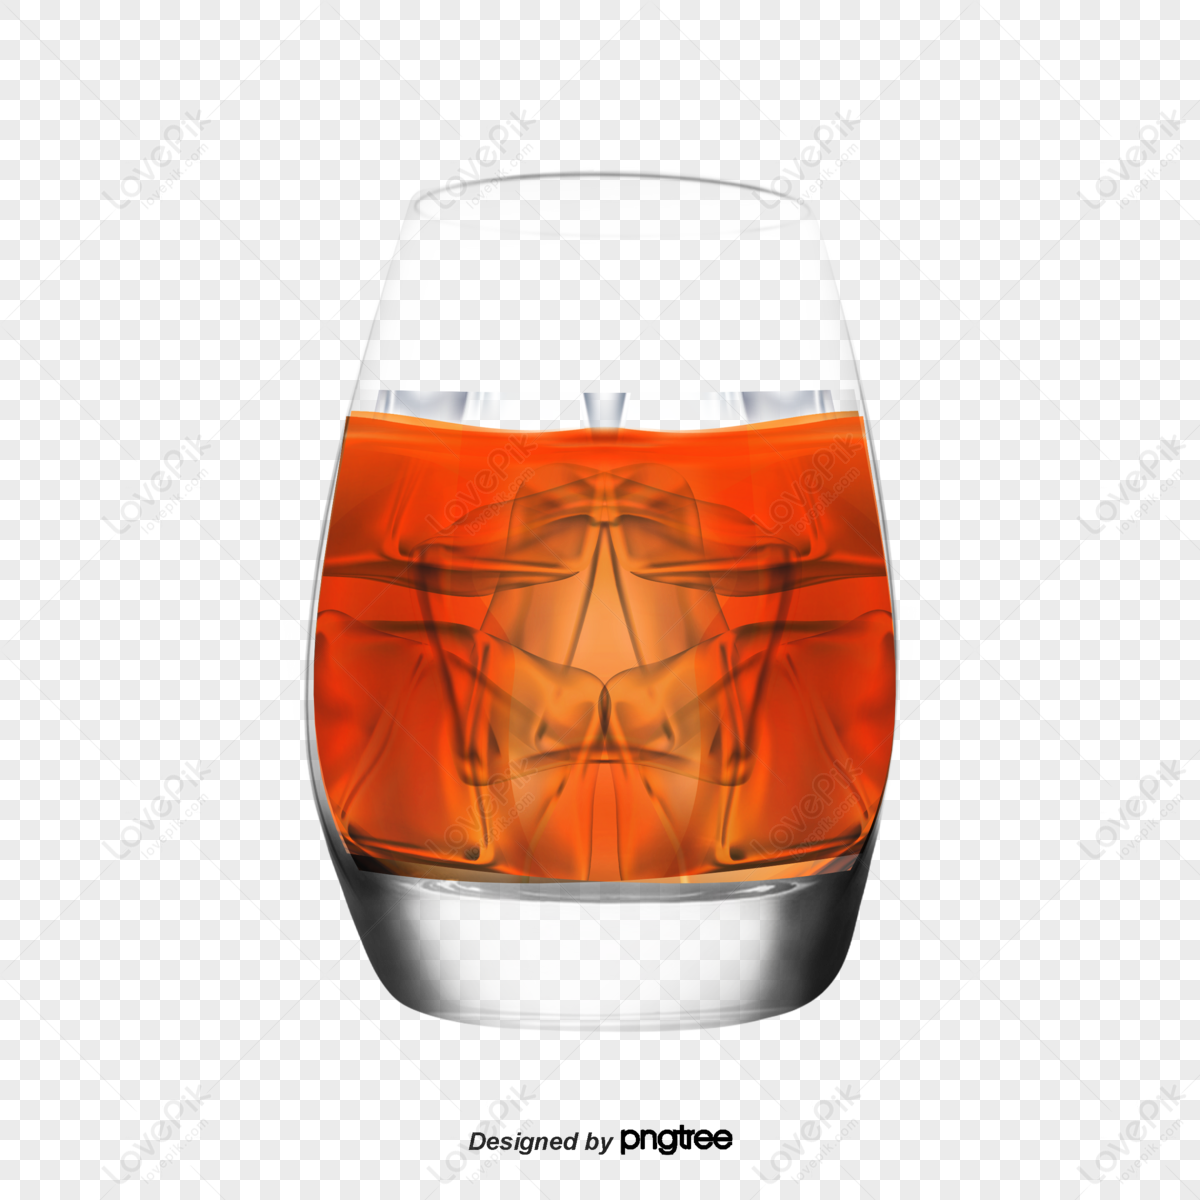 Blended Whiskey Scotch Whisky png download - 1600*2000 - Free